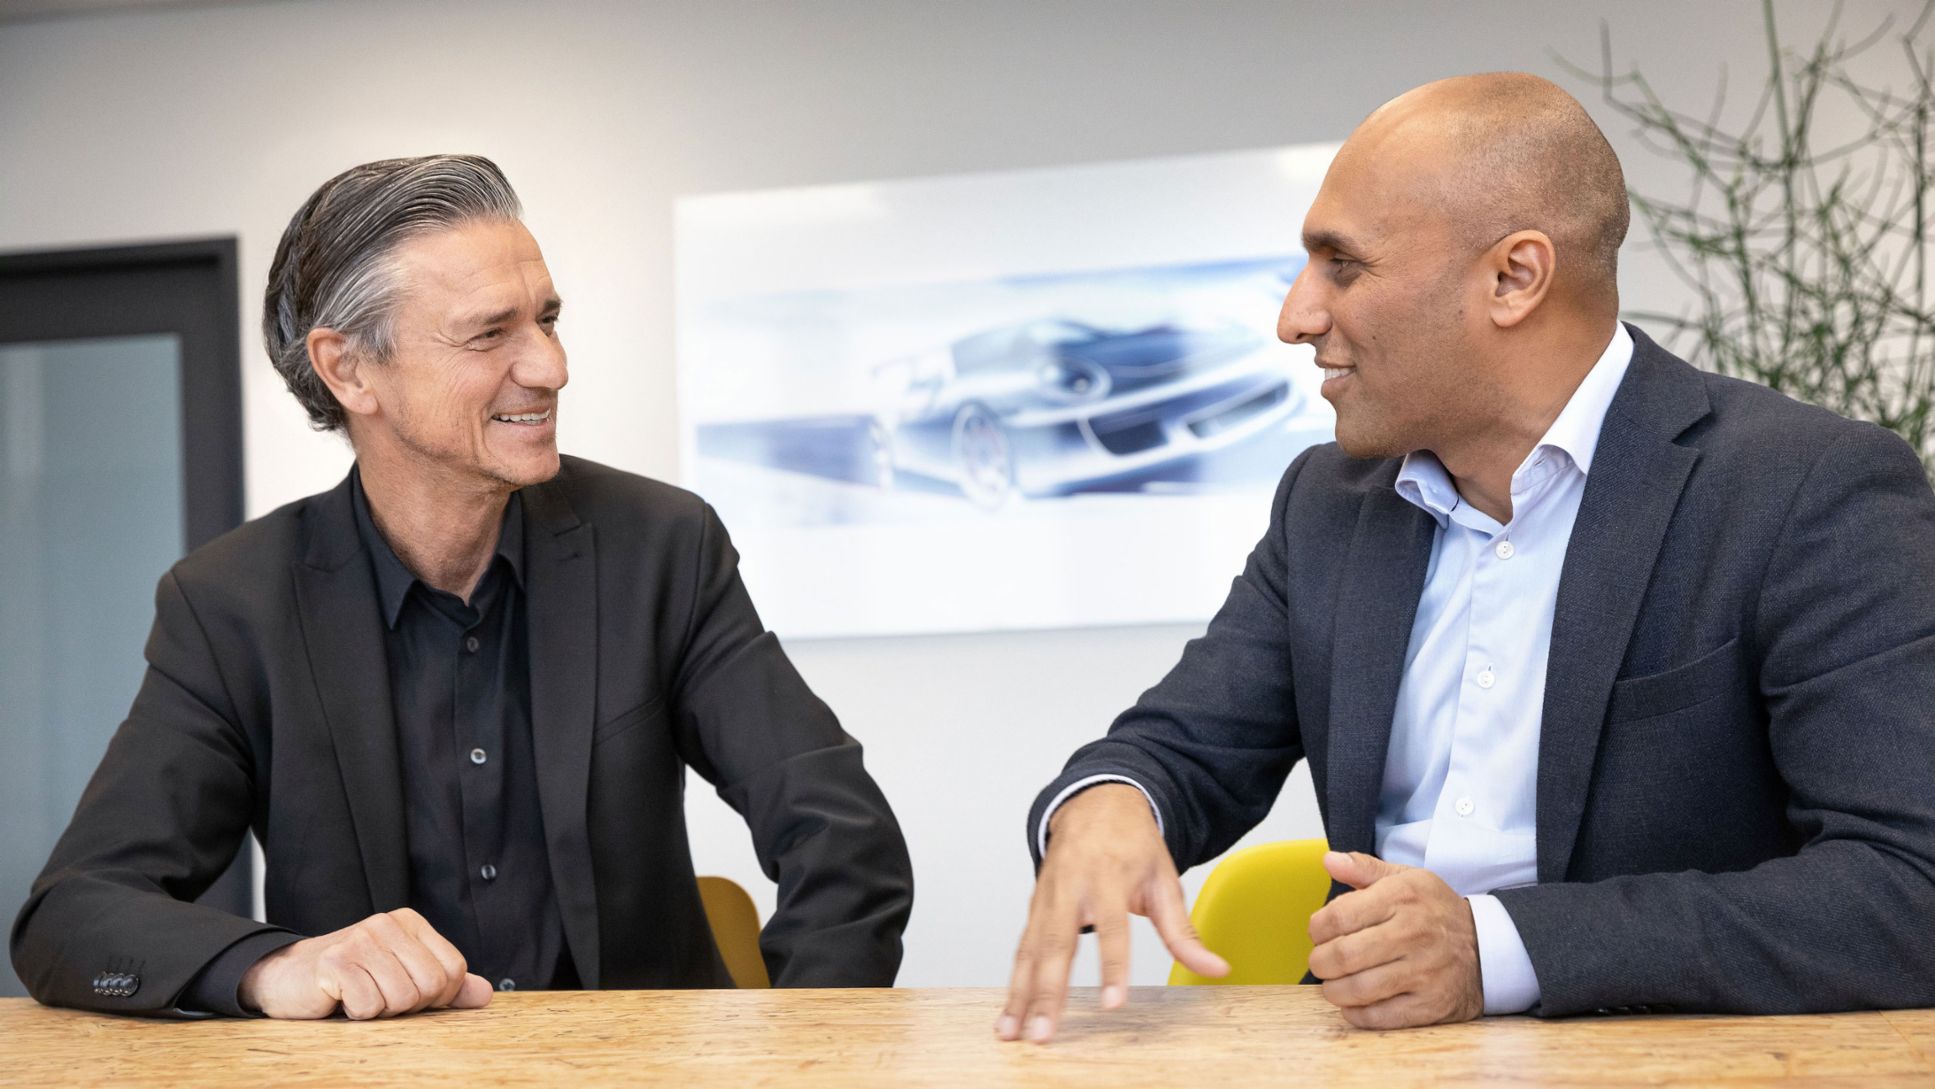 Lutz Meschke, Deputy Chairman of the Executive Board, Finance and IT, Qasar Younis, Co-Founder und CEO von Applied Intuition, 2024, Porsche AG